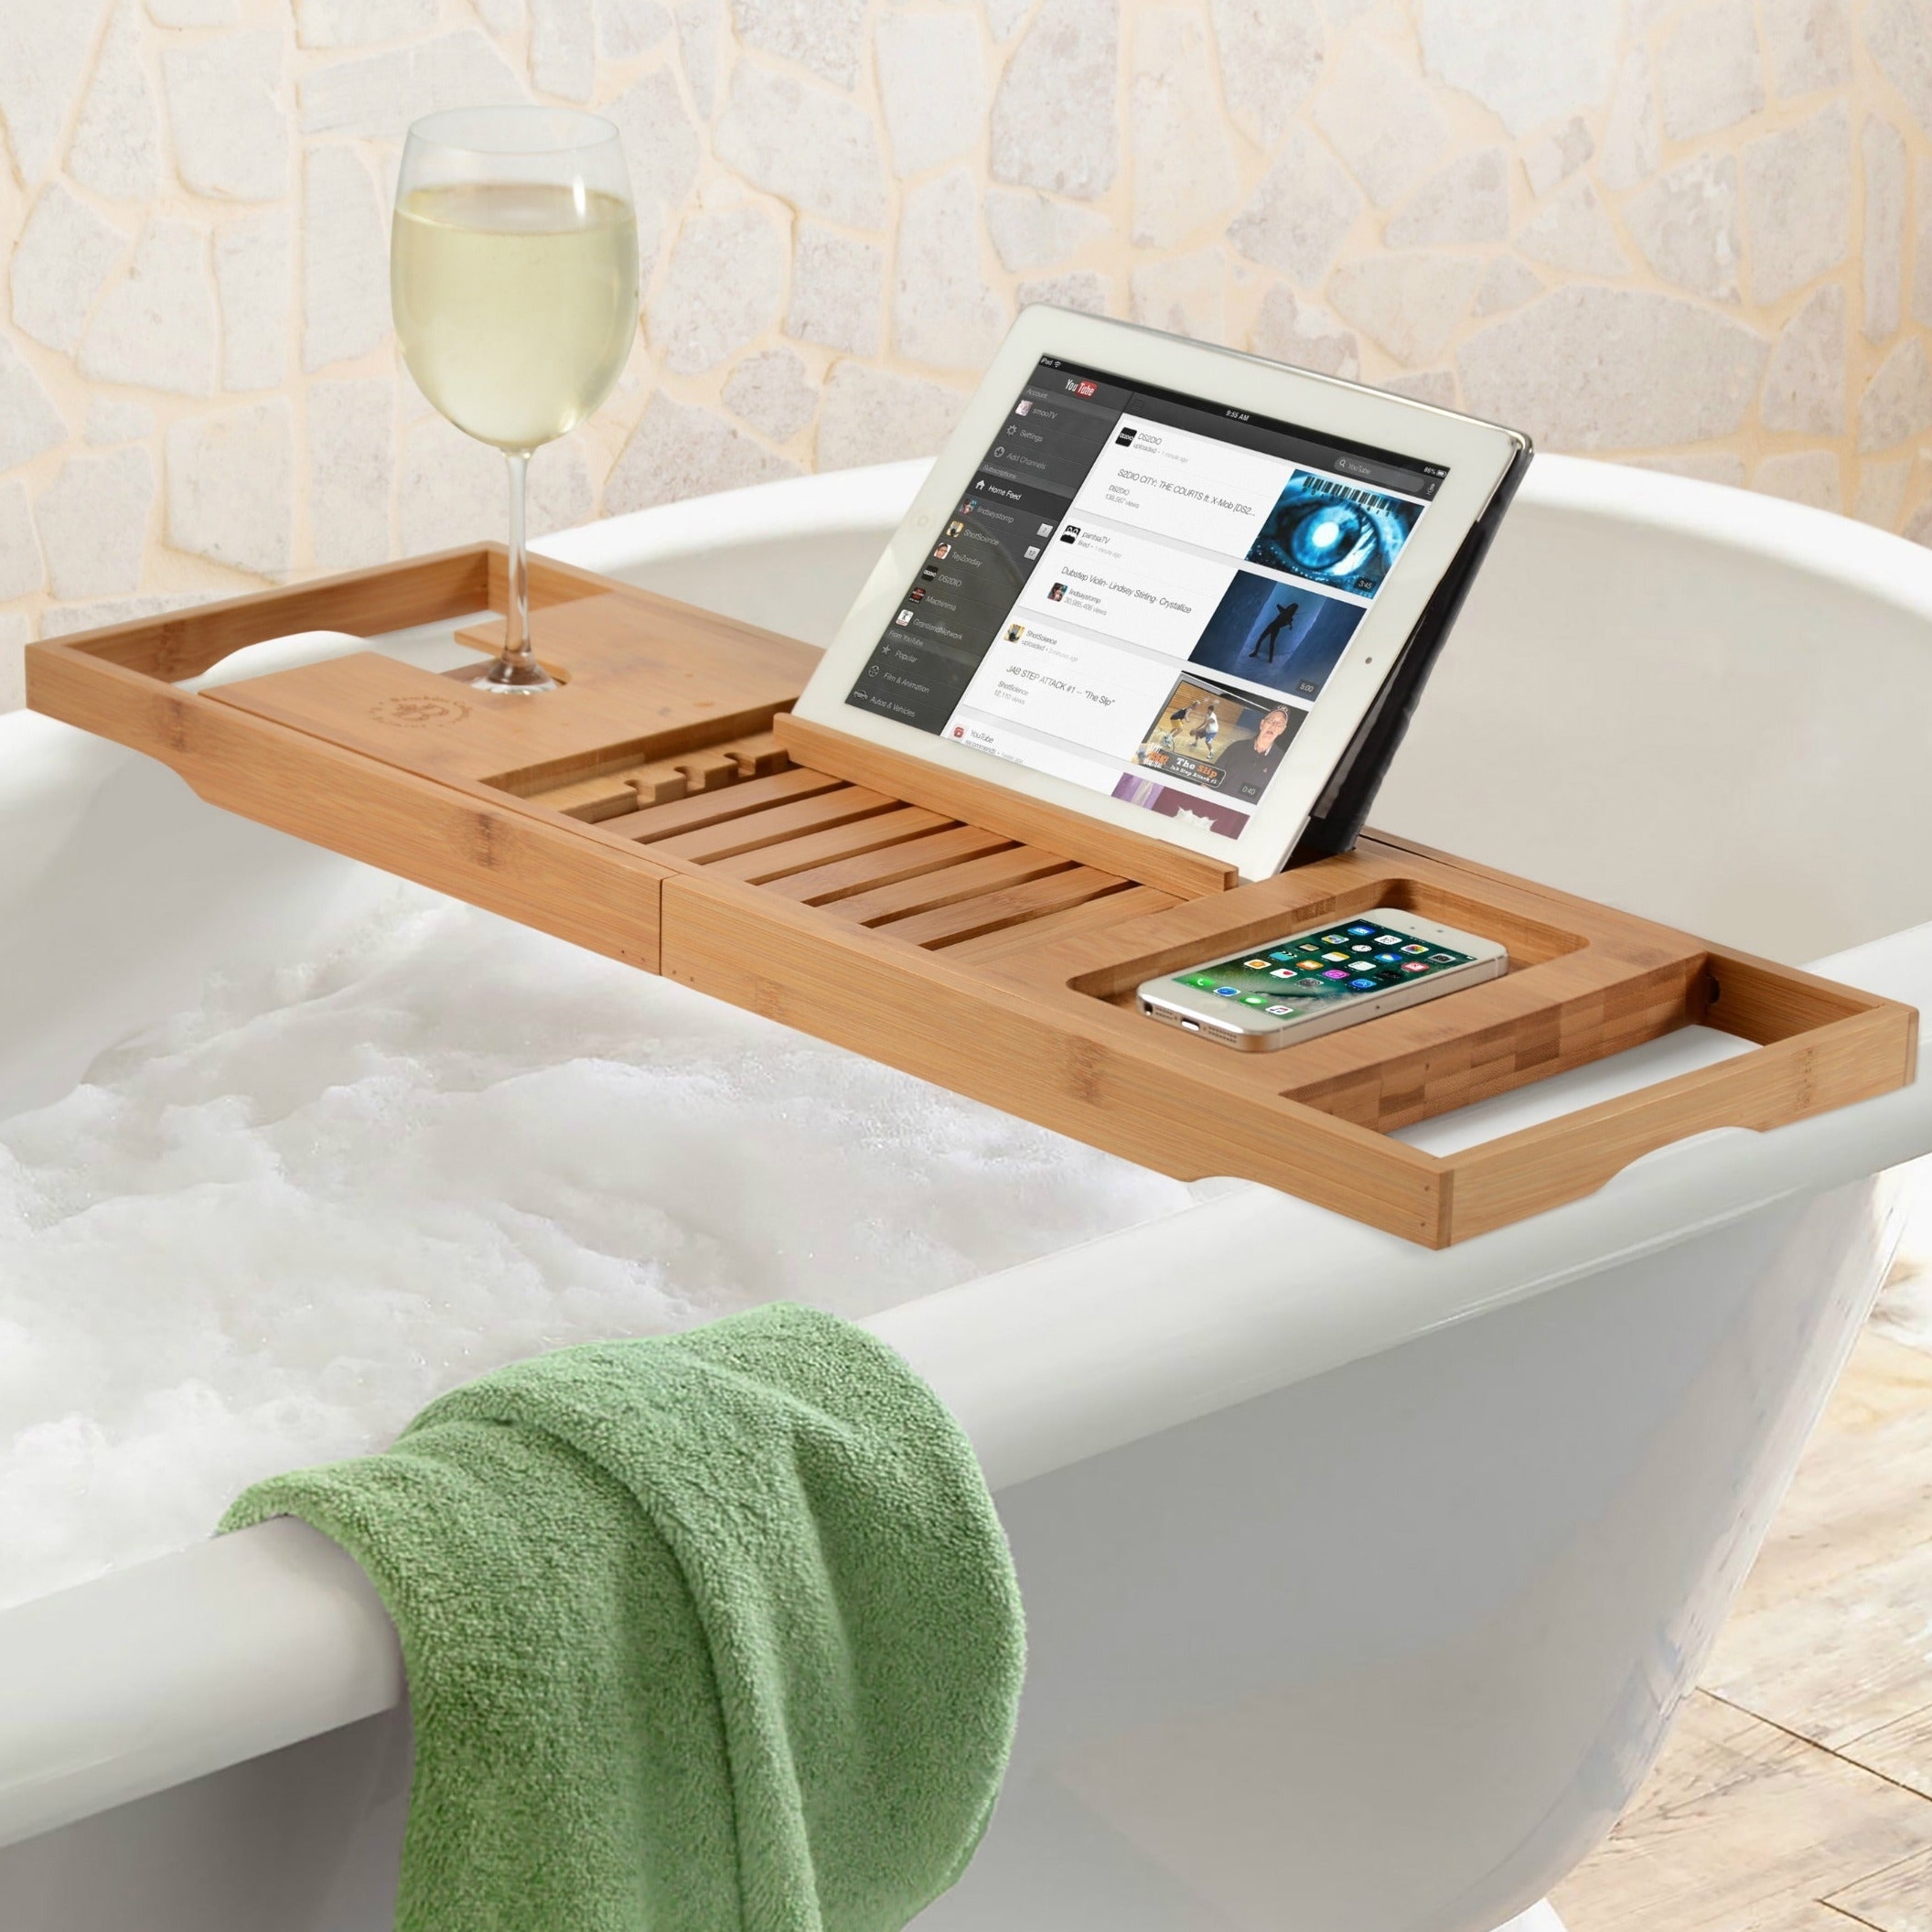 https://ak1.ostkcdn.com/images/products/is/images/direct/cf5cfdf974d9392249140c60d3773cad3f984625/Bambusi-Bathtub-Caddy-Tray-with-Extending-Sides-and-Reading-Rack.jpg